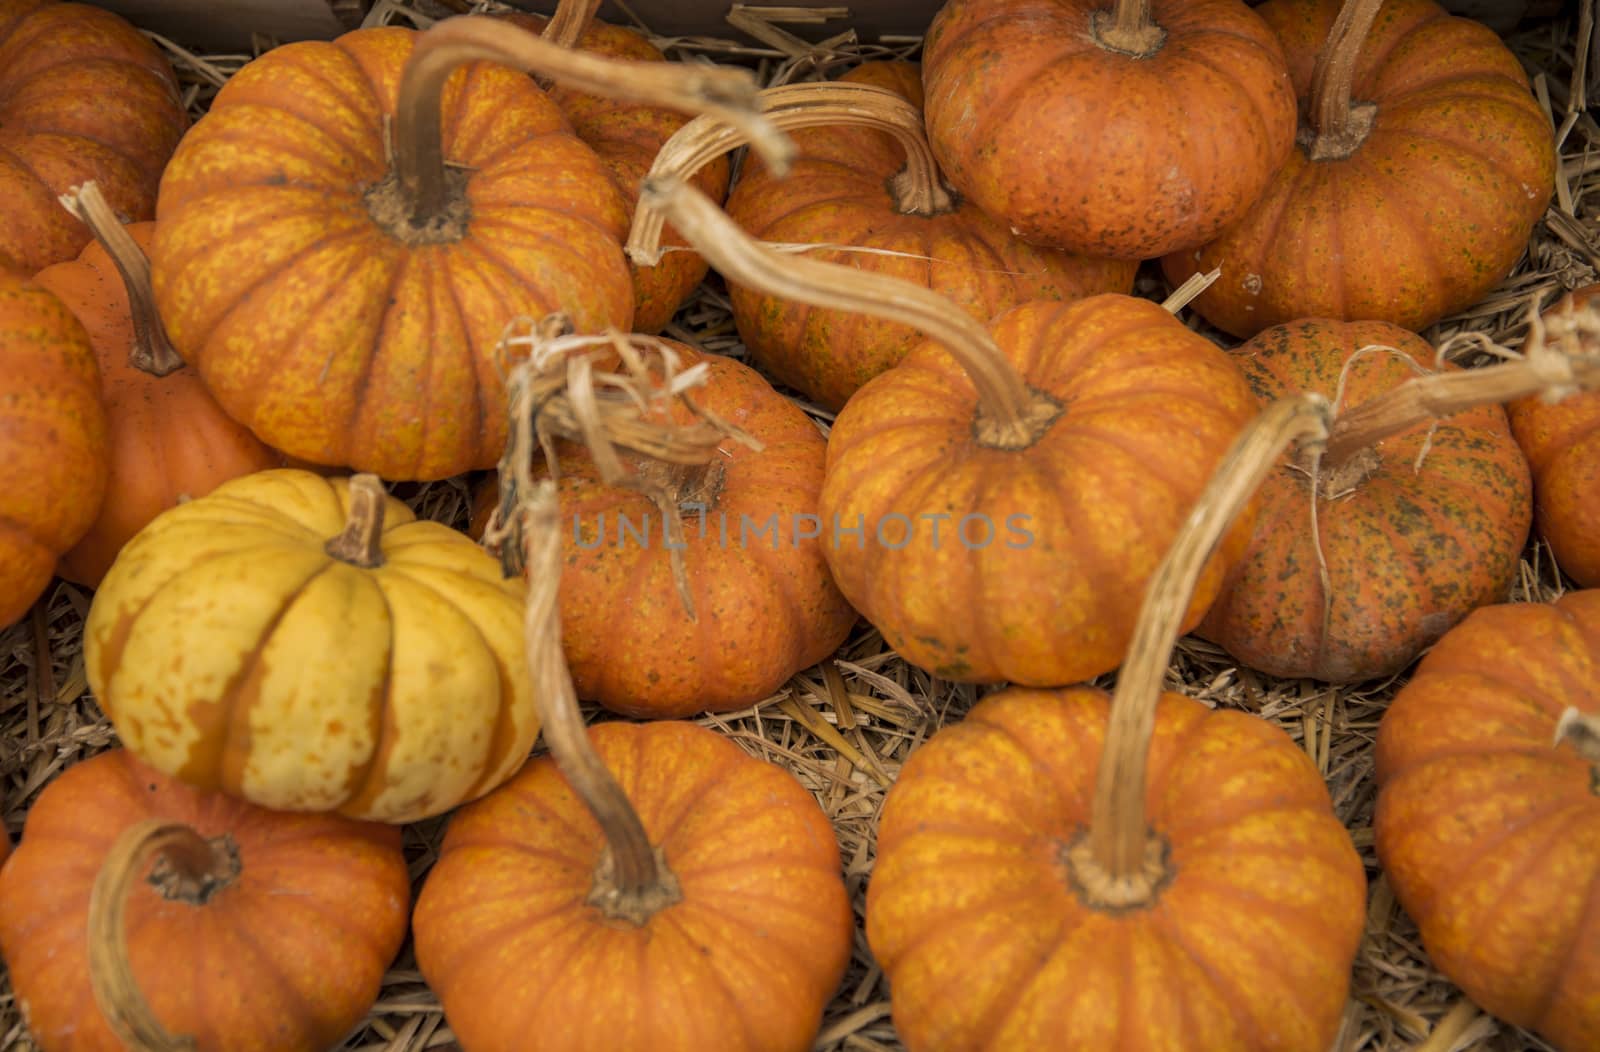 Colorful autumn pumpkins on wooden surface ready to sell